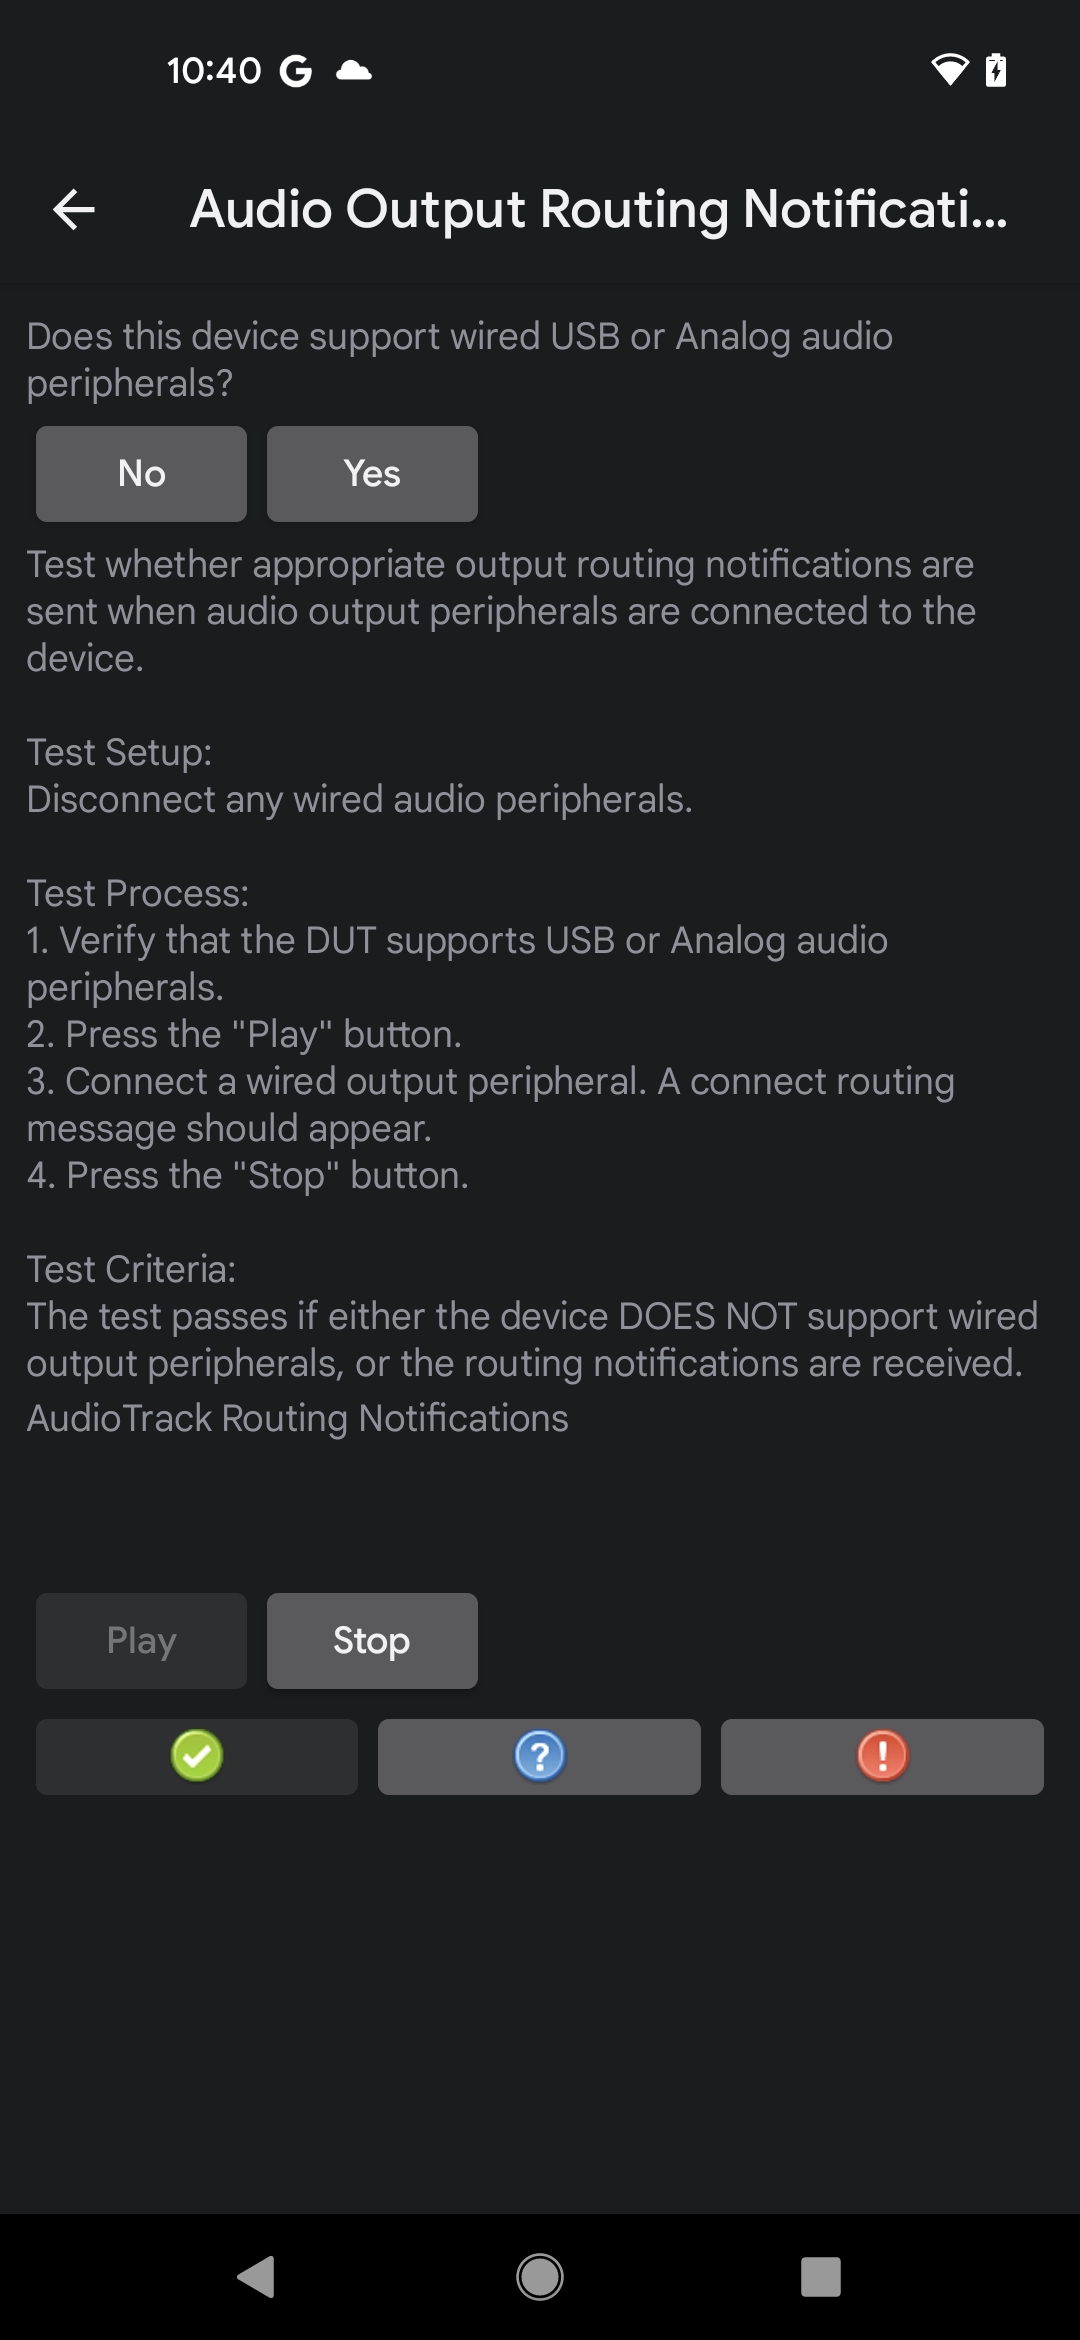 Audio Output Routing Notifications test